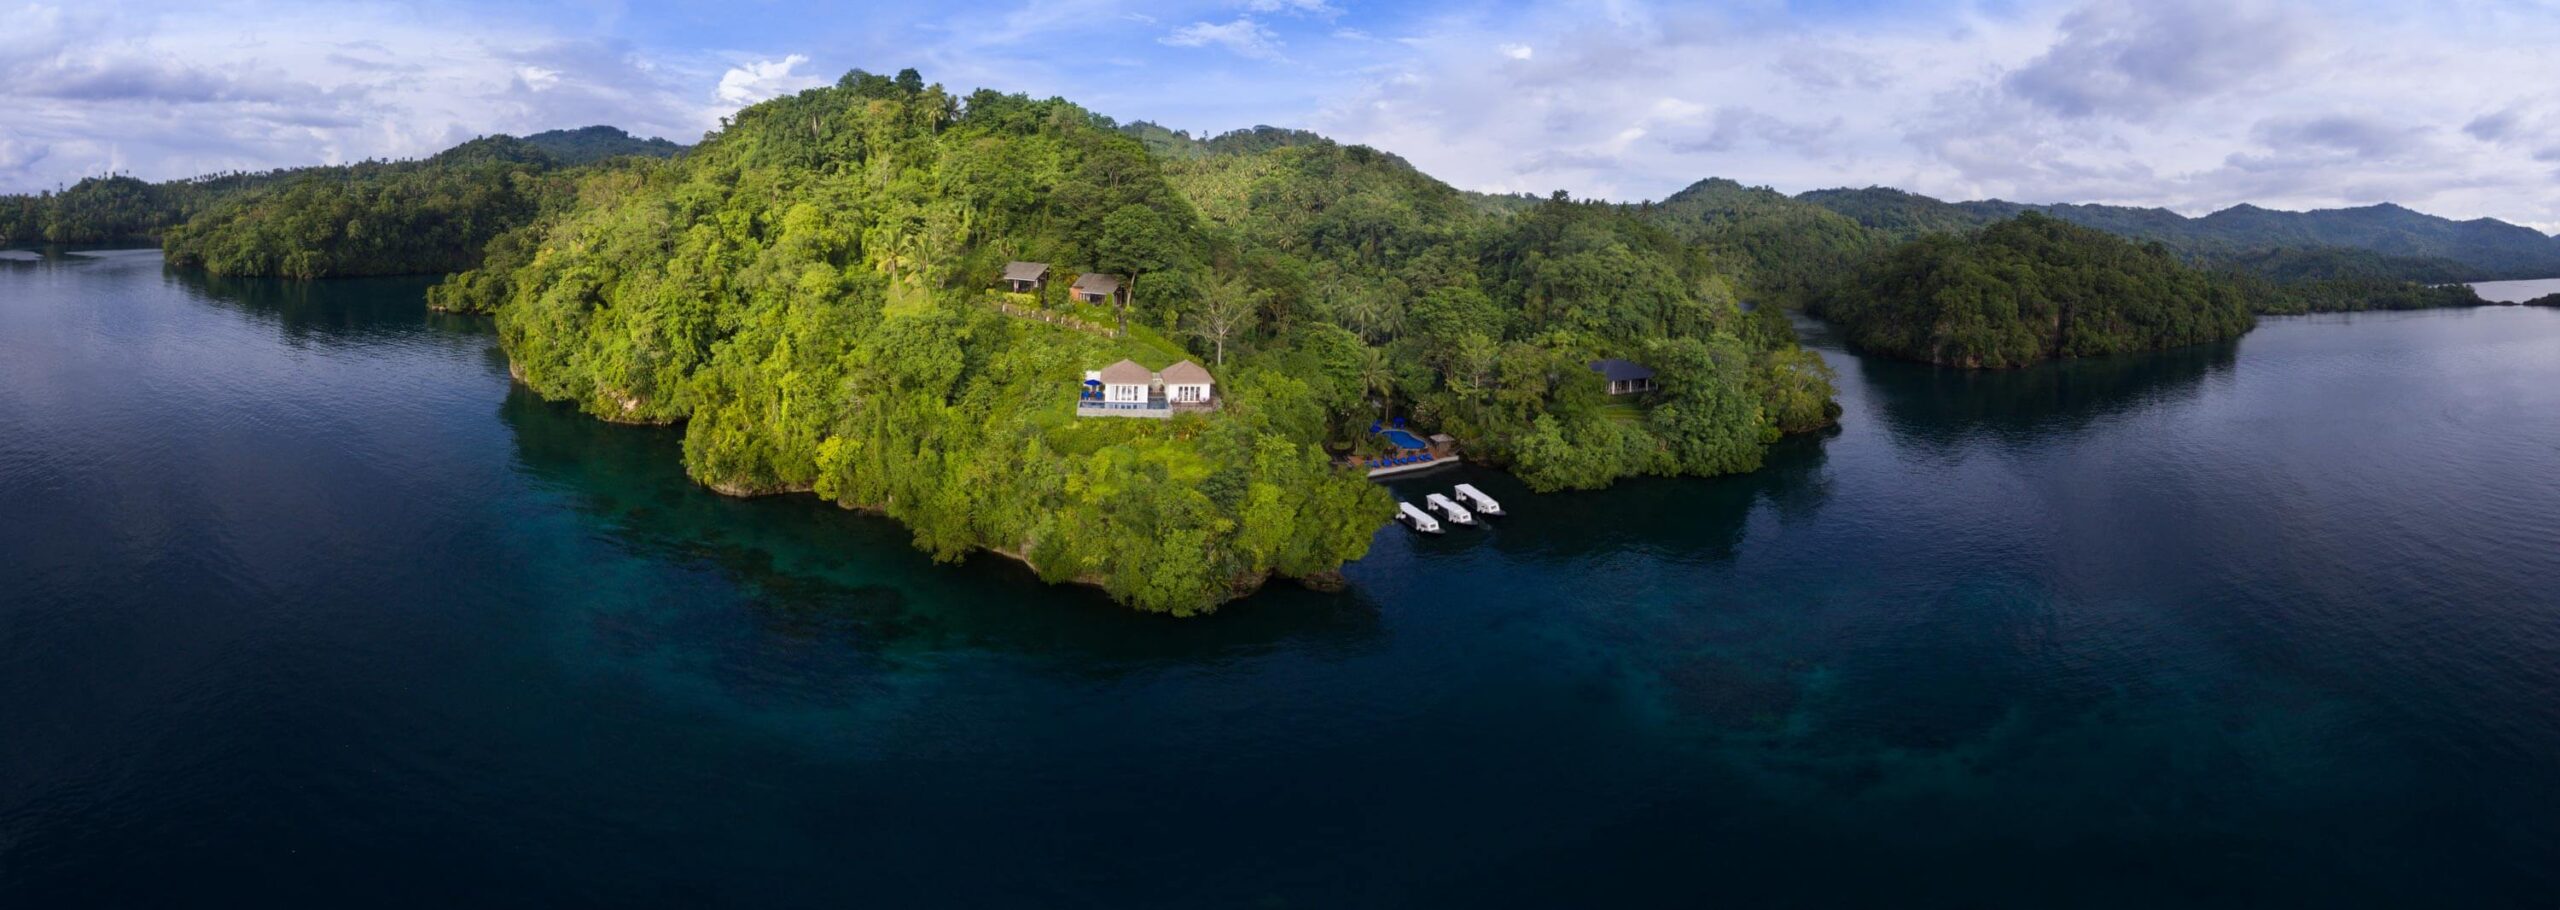 lembeh resort by the hill panoramic shot